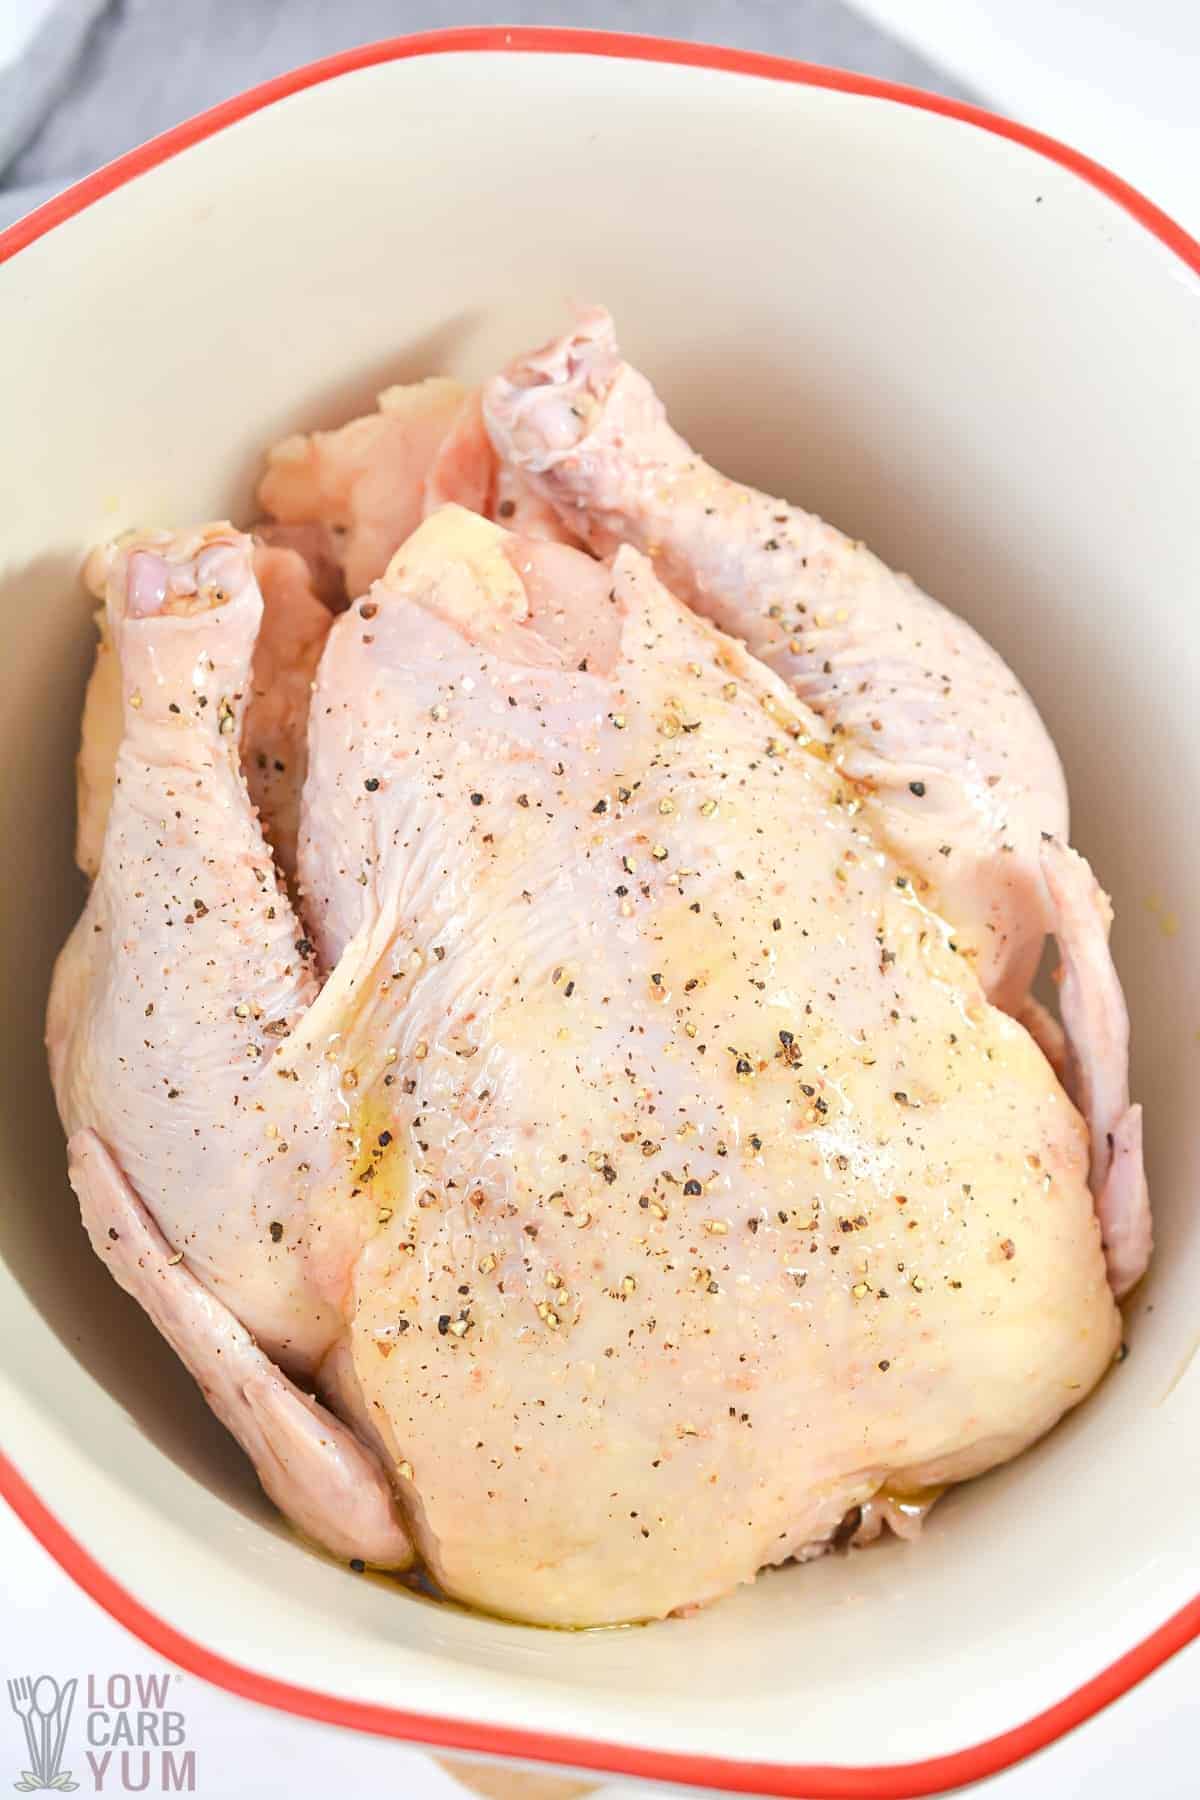 preparing whole chicken for air fryer with oil and seasonings